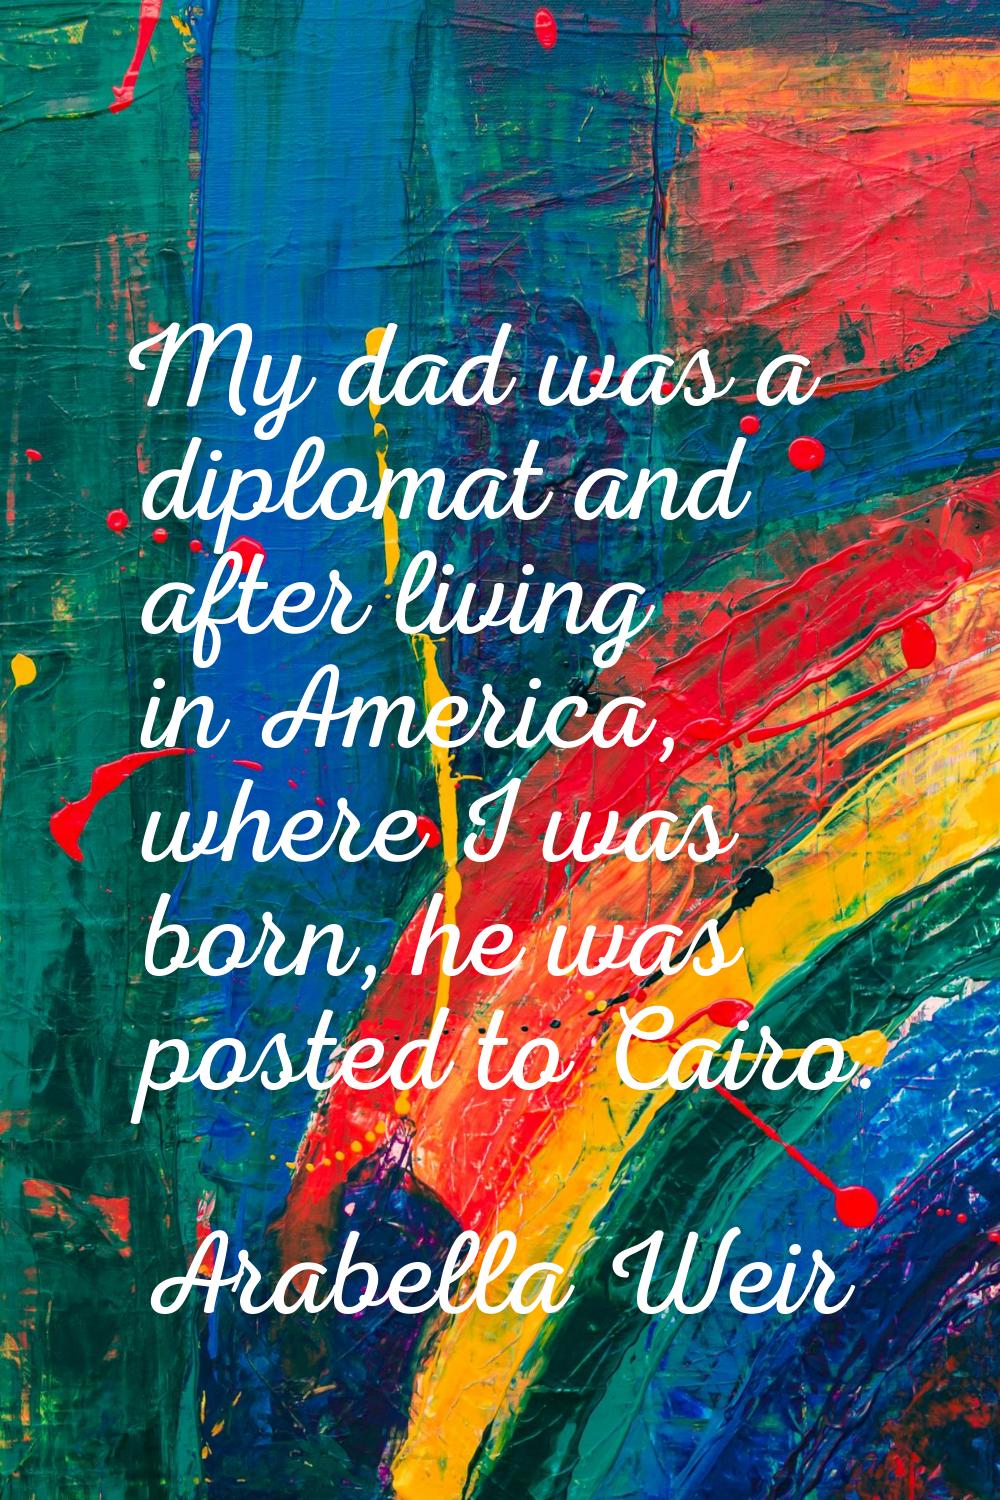 My dad was a diplomat and after living in America, where I was born, he was posted to Cairo.